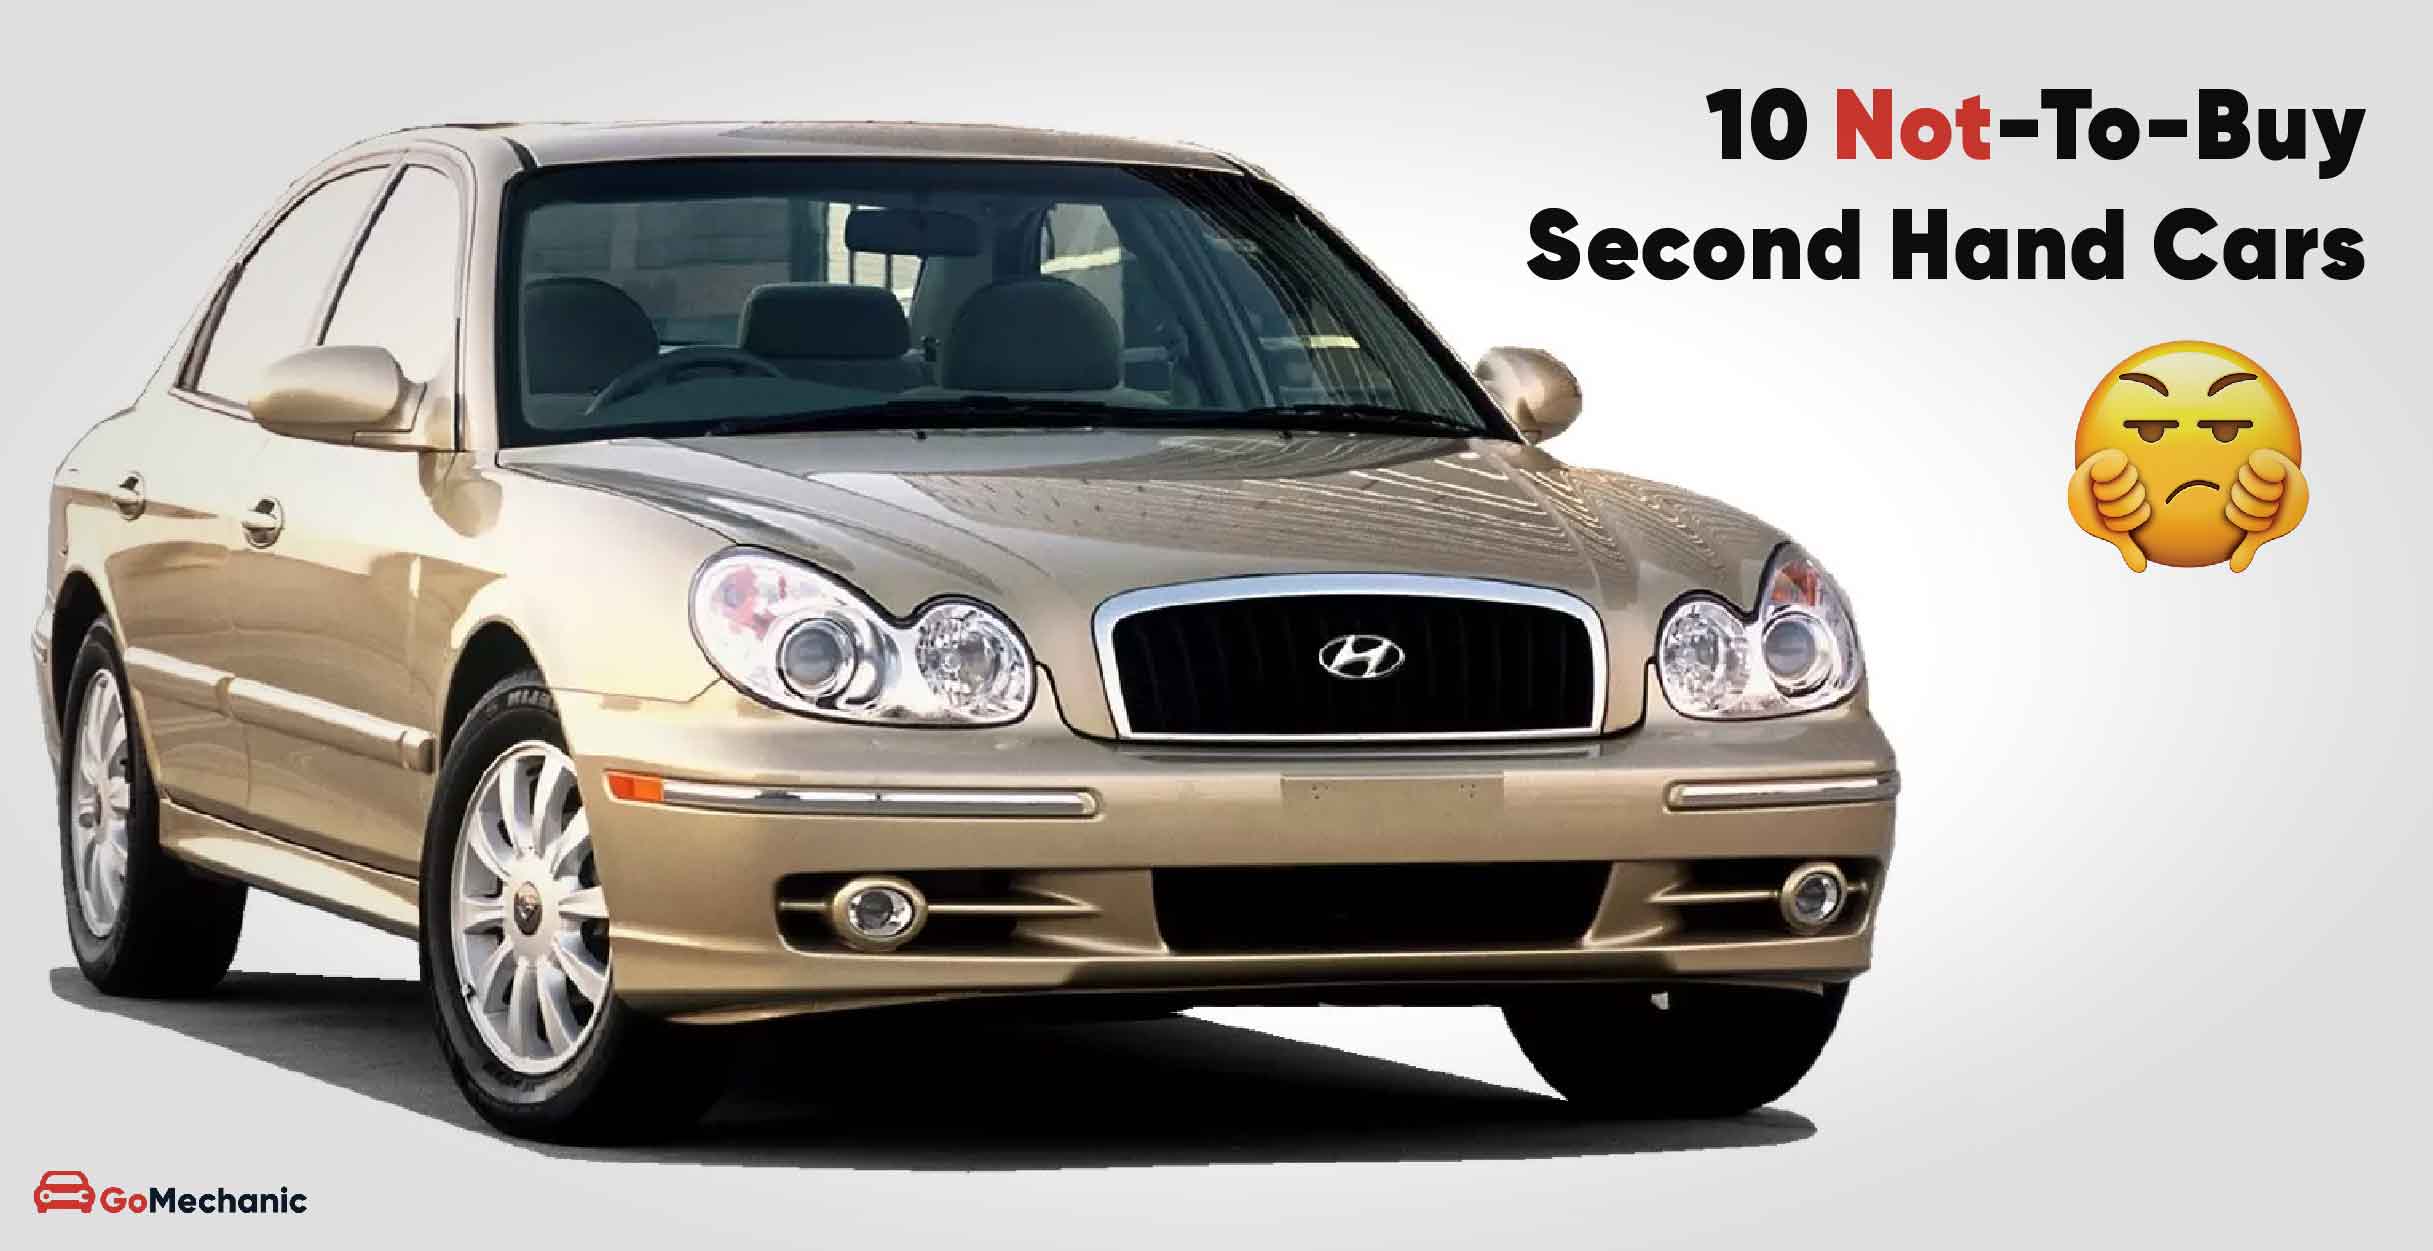 10 Not-To-Buy (Worst-Rated) Second-Hand Used cars in India